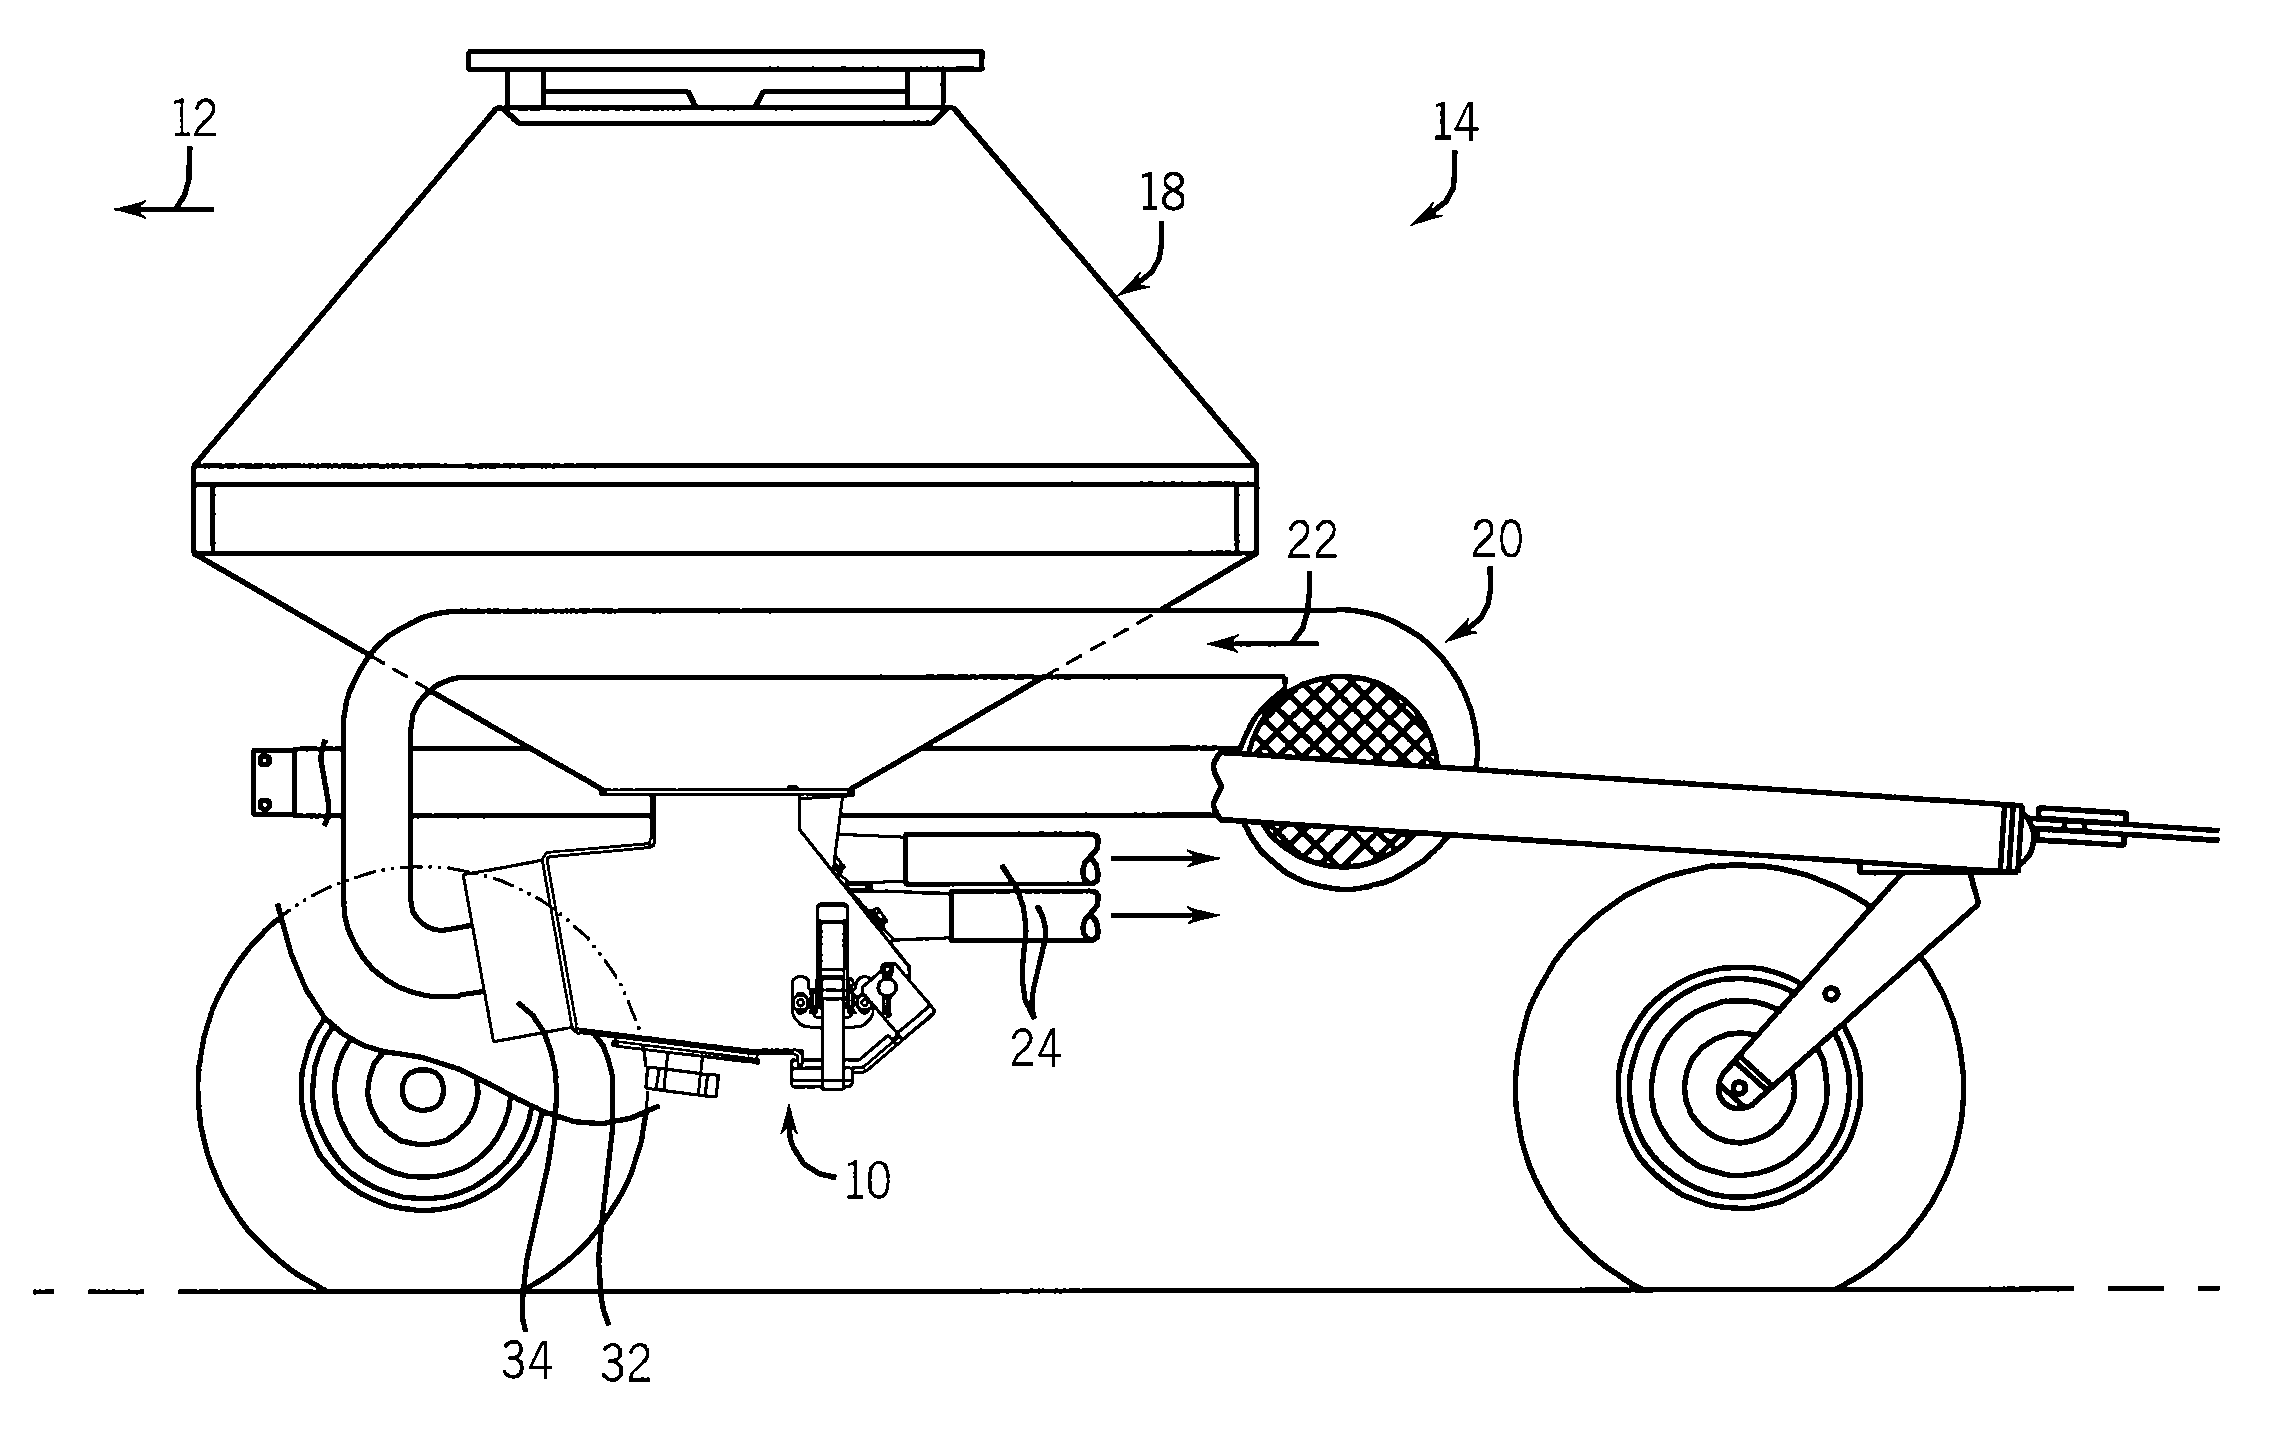 Inductor Assembly For A Product Conveyance System